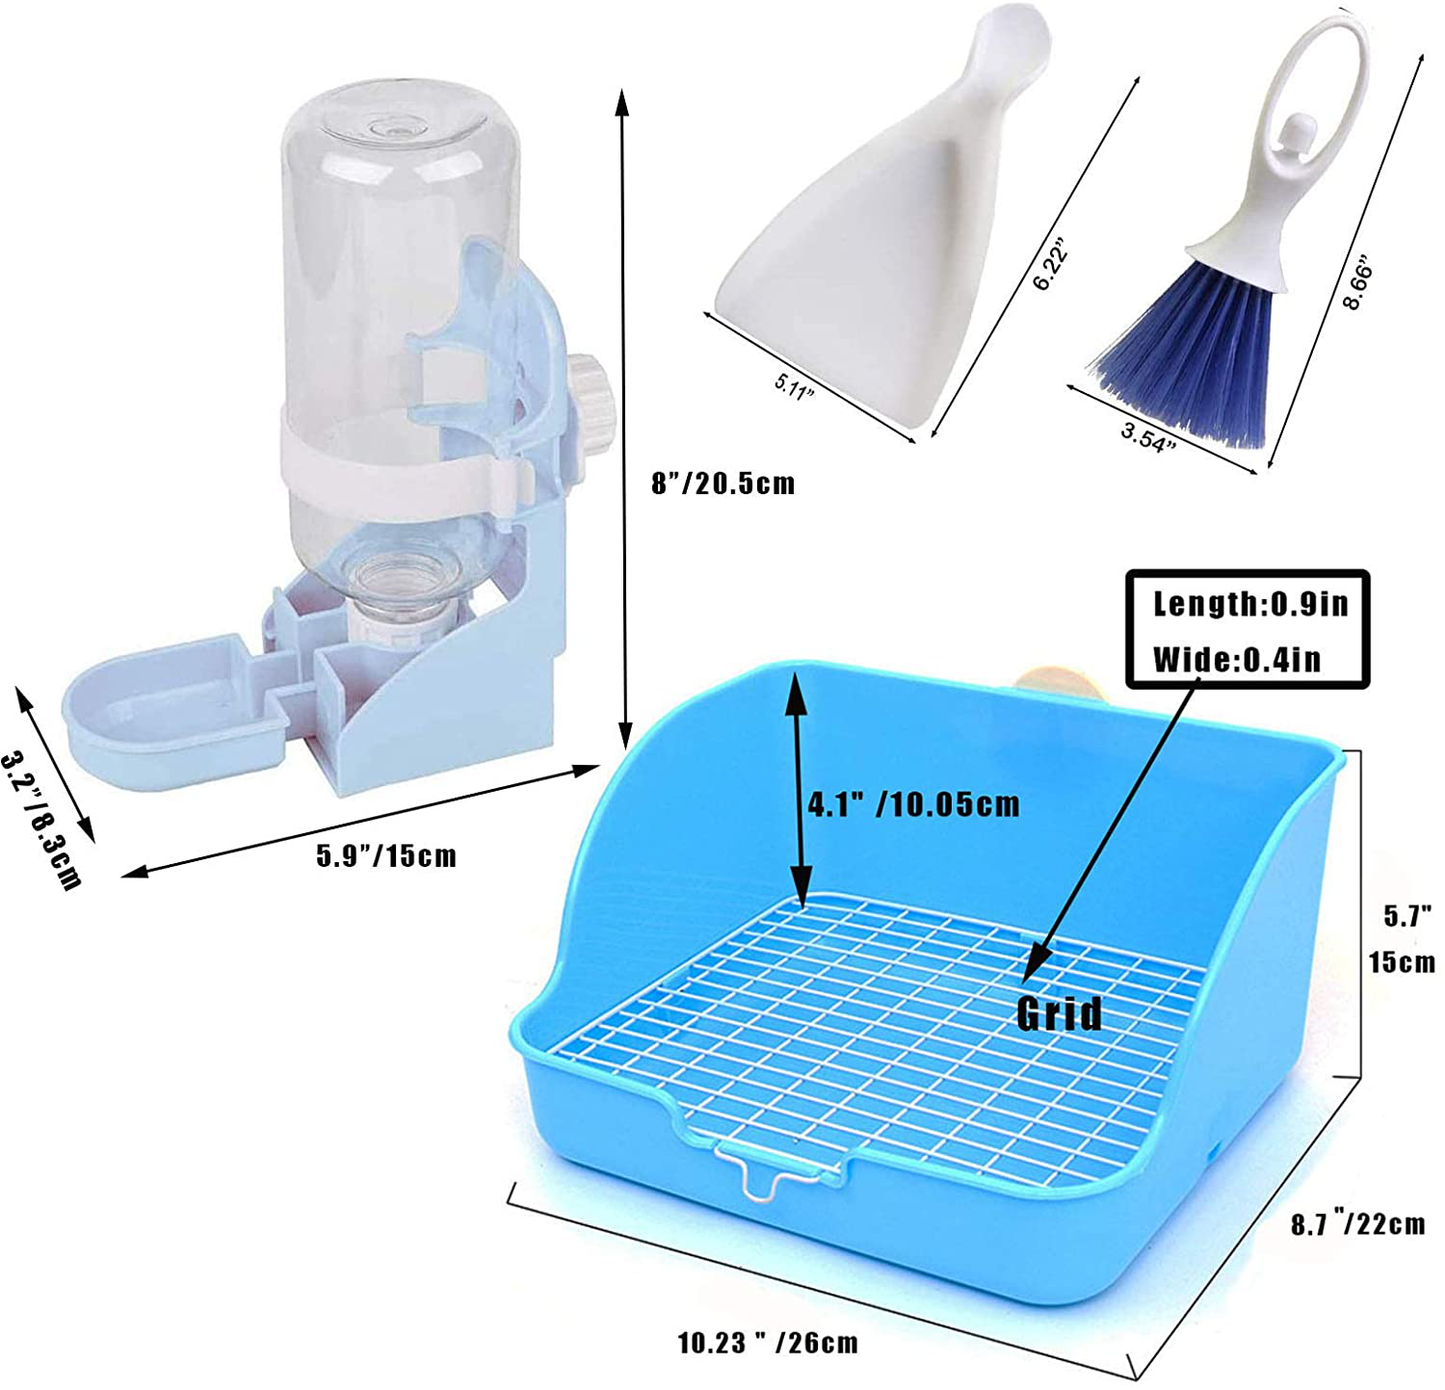 Rabbit Litter Box Small Animal Toilet Bunny Water Bottle 17Oz Hanging Water Fountain Automatic Dispenser Square Cage Bedding Box Rat Potty Trainer Corner Pet Pan for Guinea Pigs,Chinchilla,Ferret